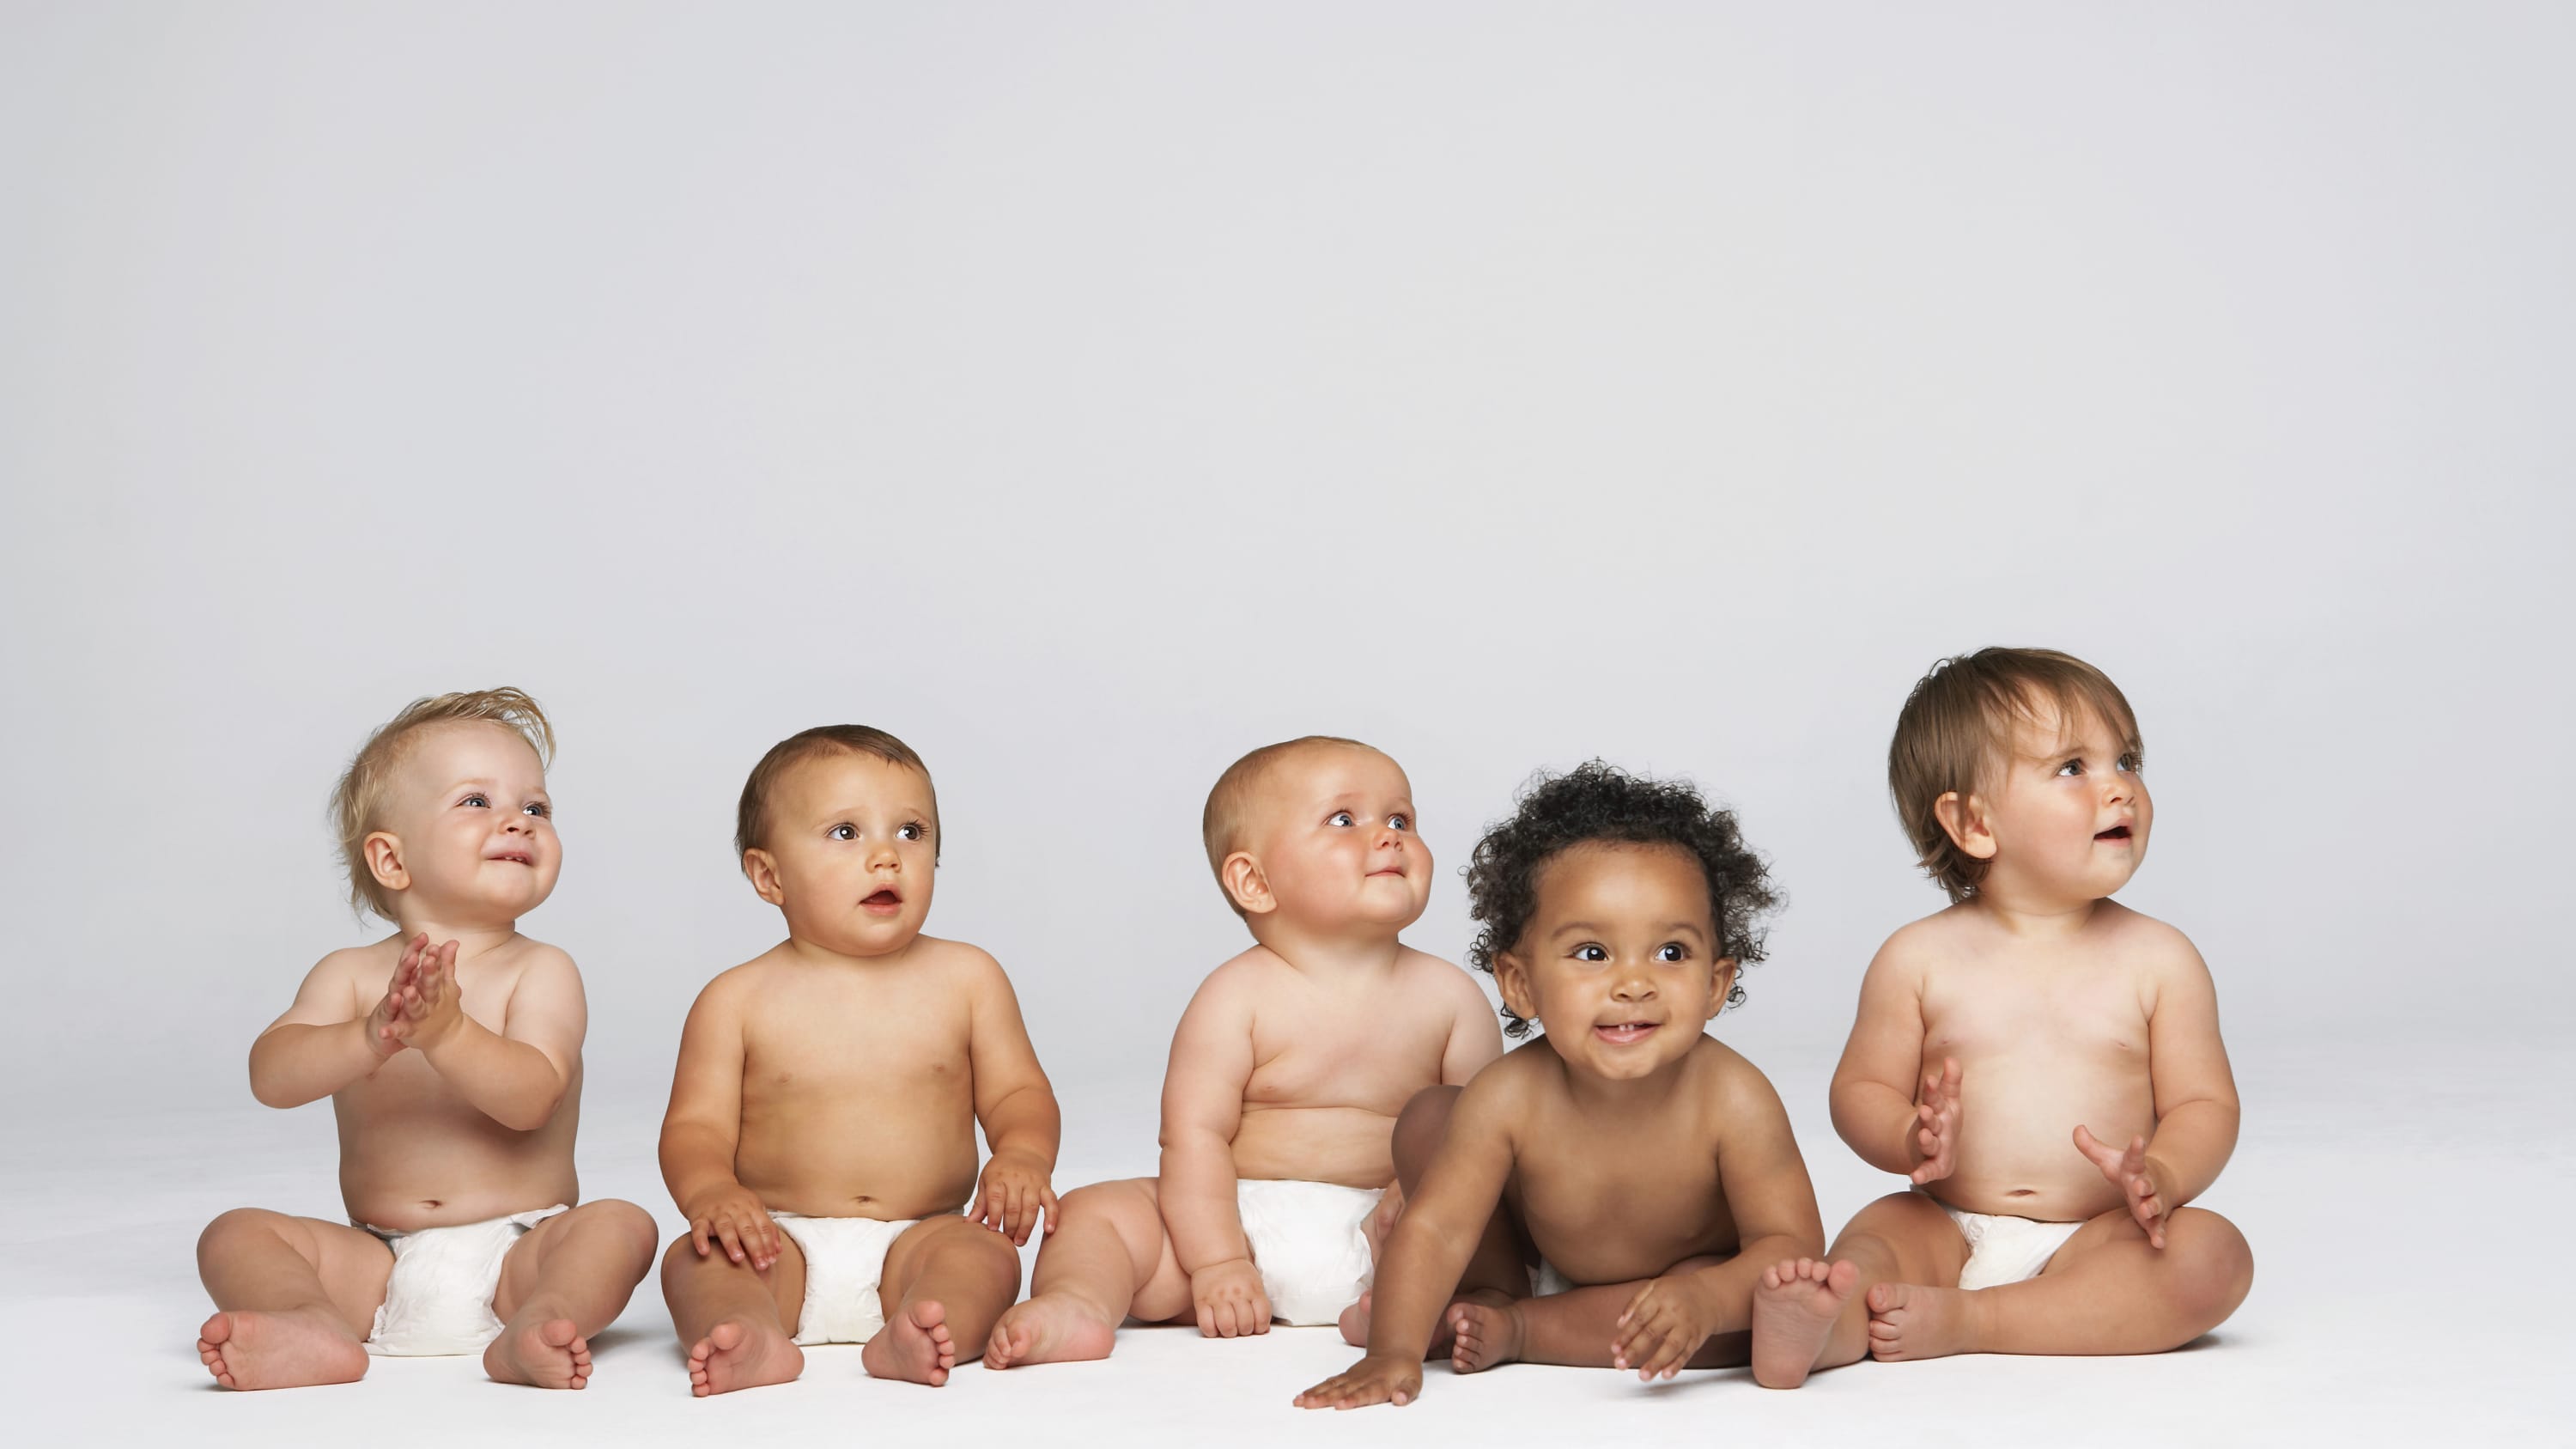 A group of babies, possibly born as the result of IVF, a successful infertility treatment